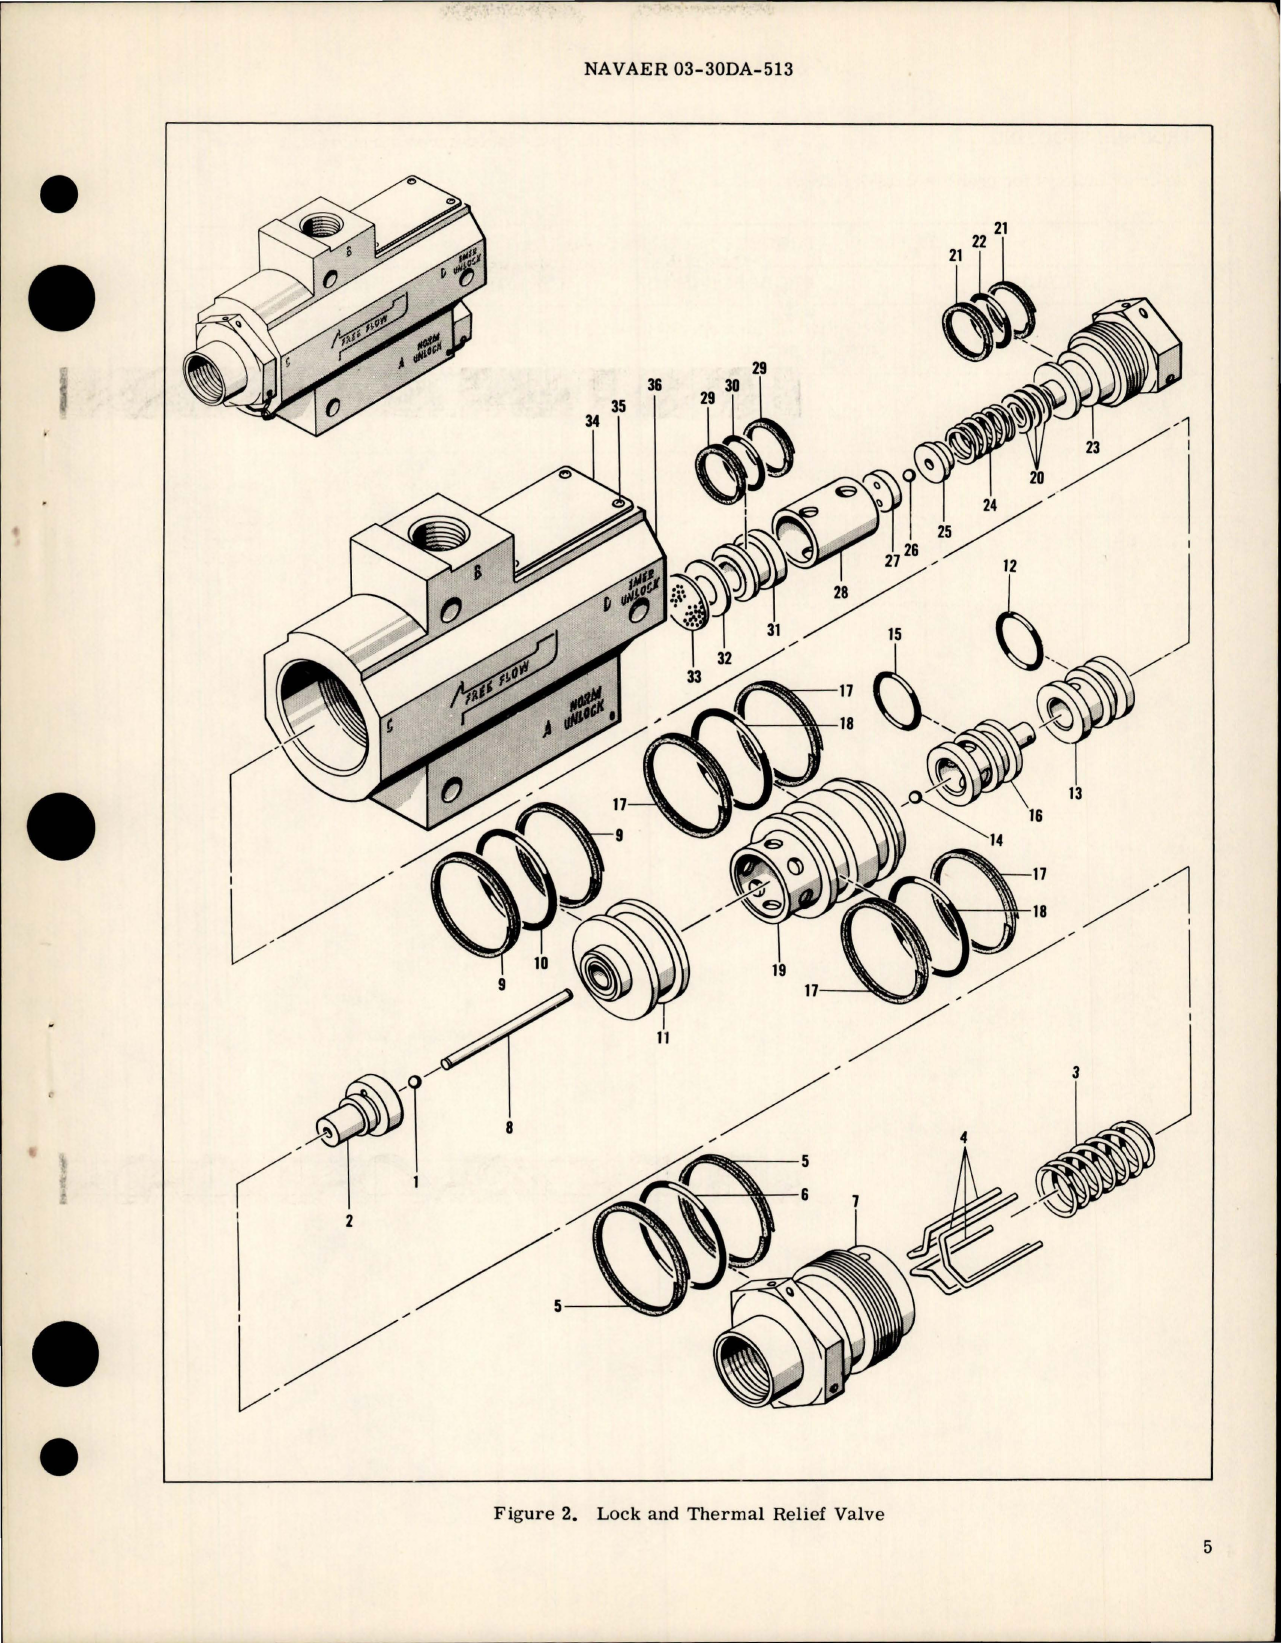 Sample page 5 from AirCorps Library document: Overhaul Instructions with Parts Breakdown for Lock and Thermal Relief Valve - Part 14800